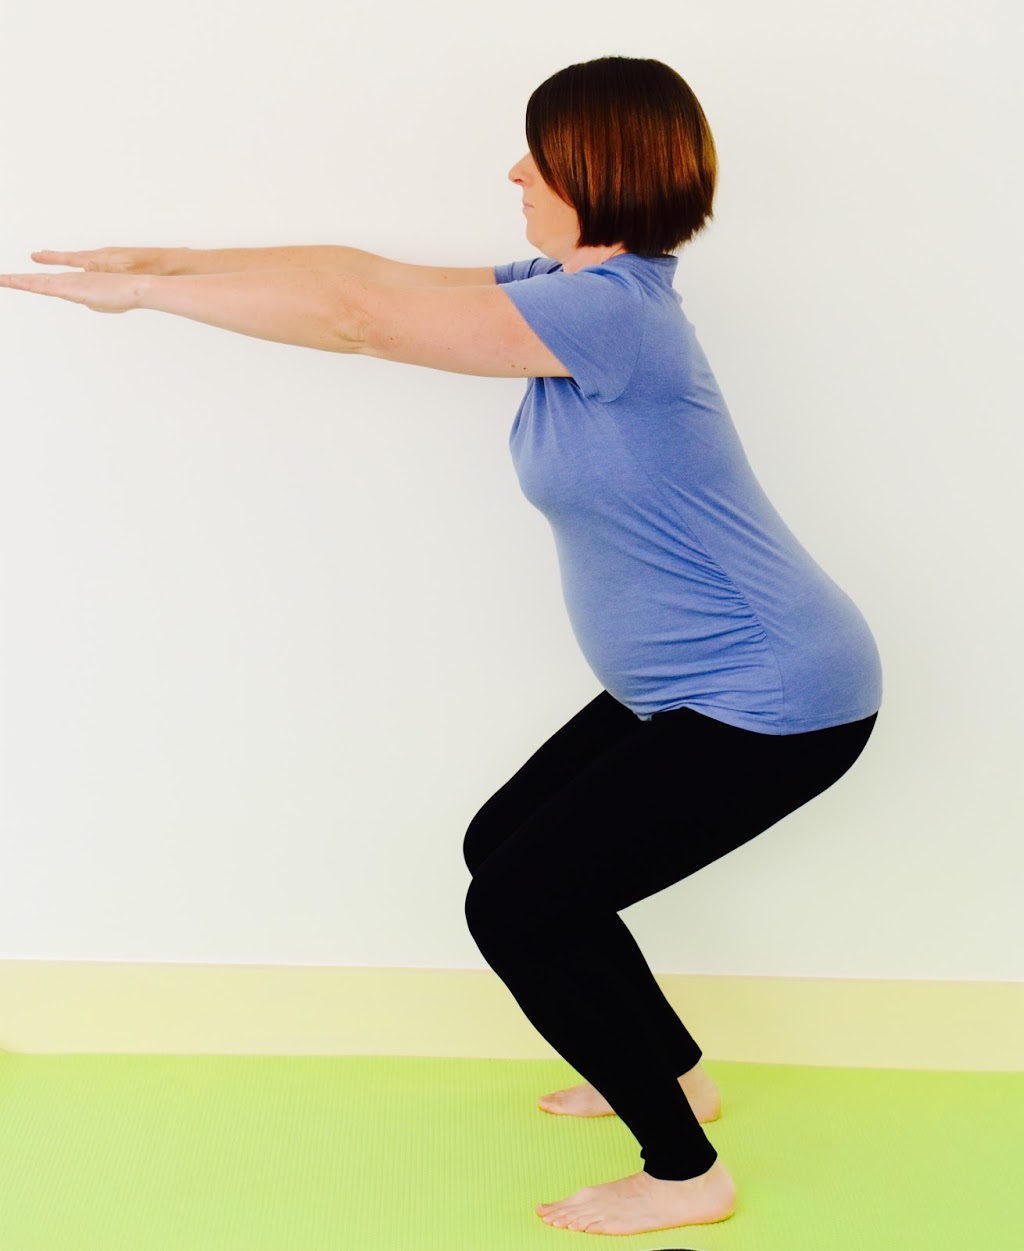 Yoga for Birth and Beyond - Canberra | gym | Collett Pl, Canberra ACT 2606, Australia | 0414797533 OR +61 414 797 533